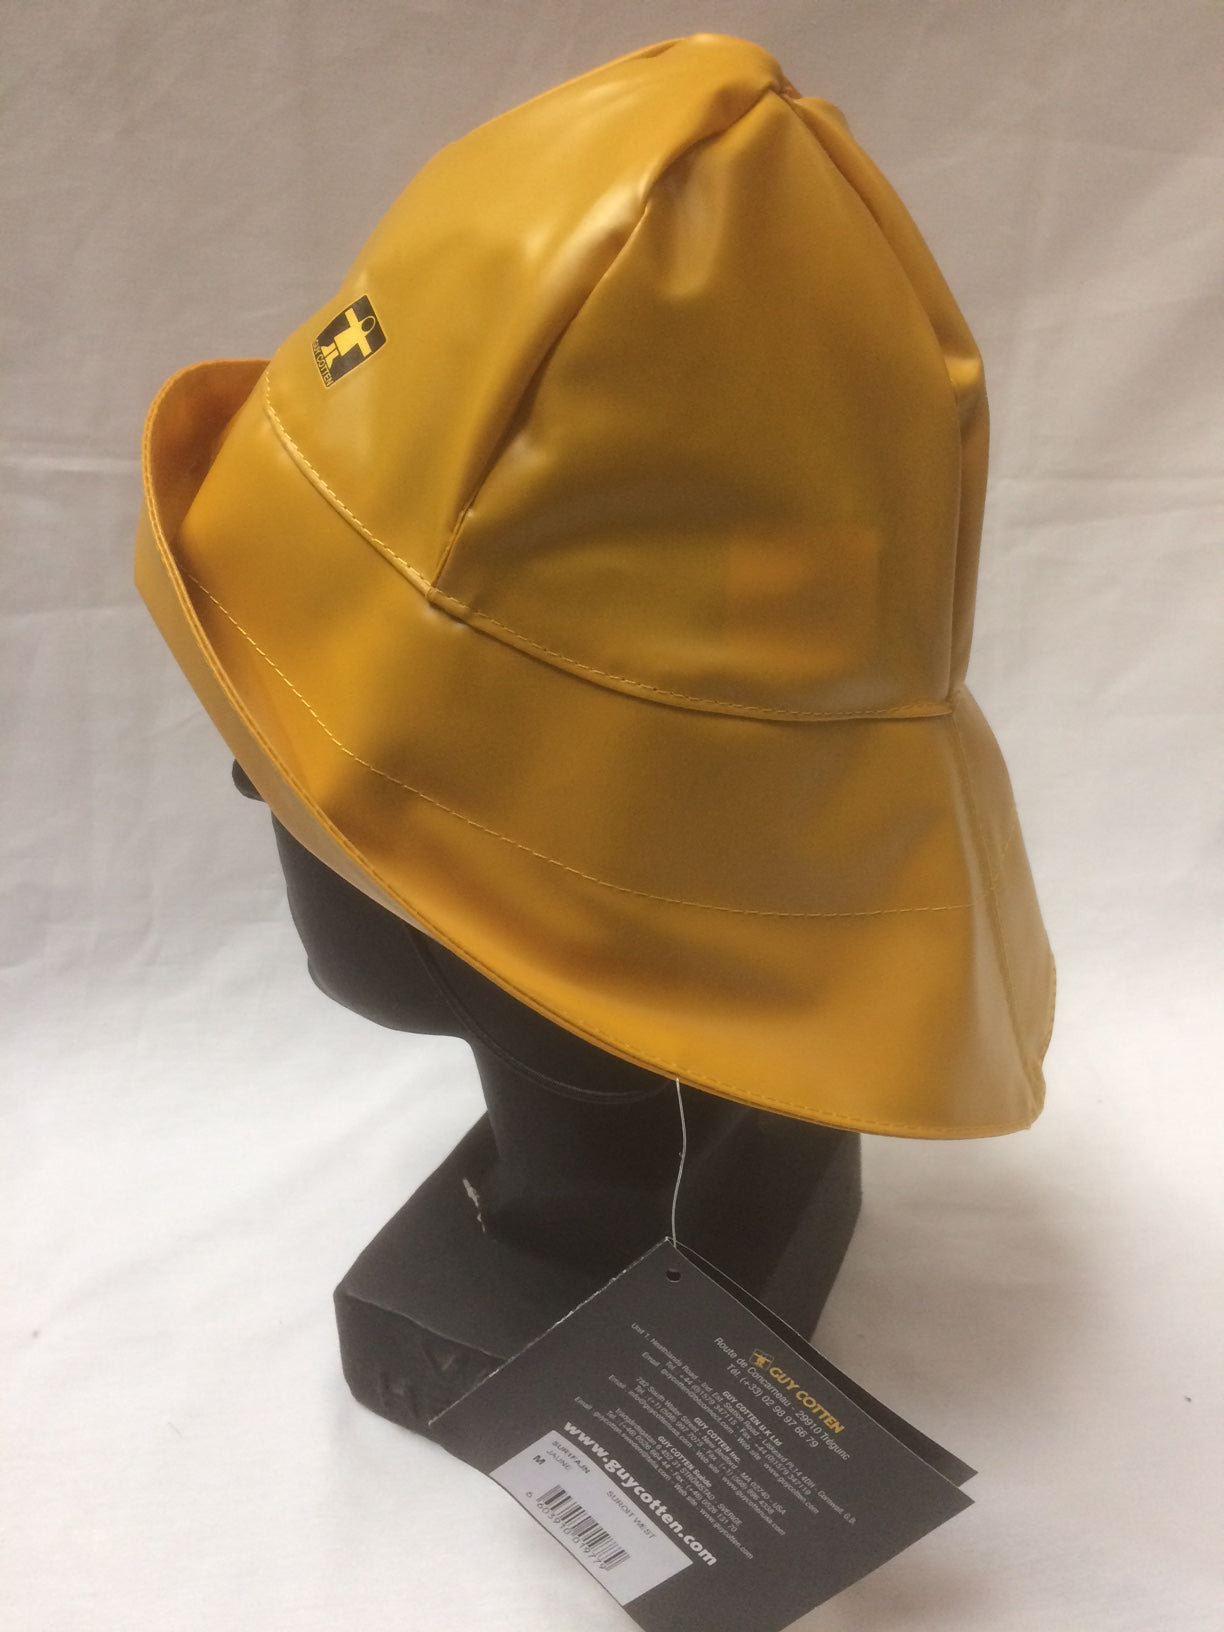 Suroit West Sou-Wester all weather Hat (Yellow) by Guy Cotten